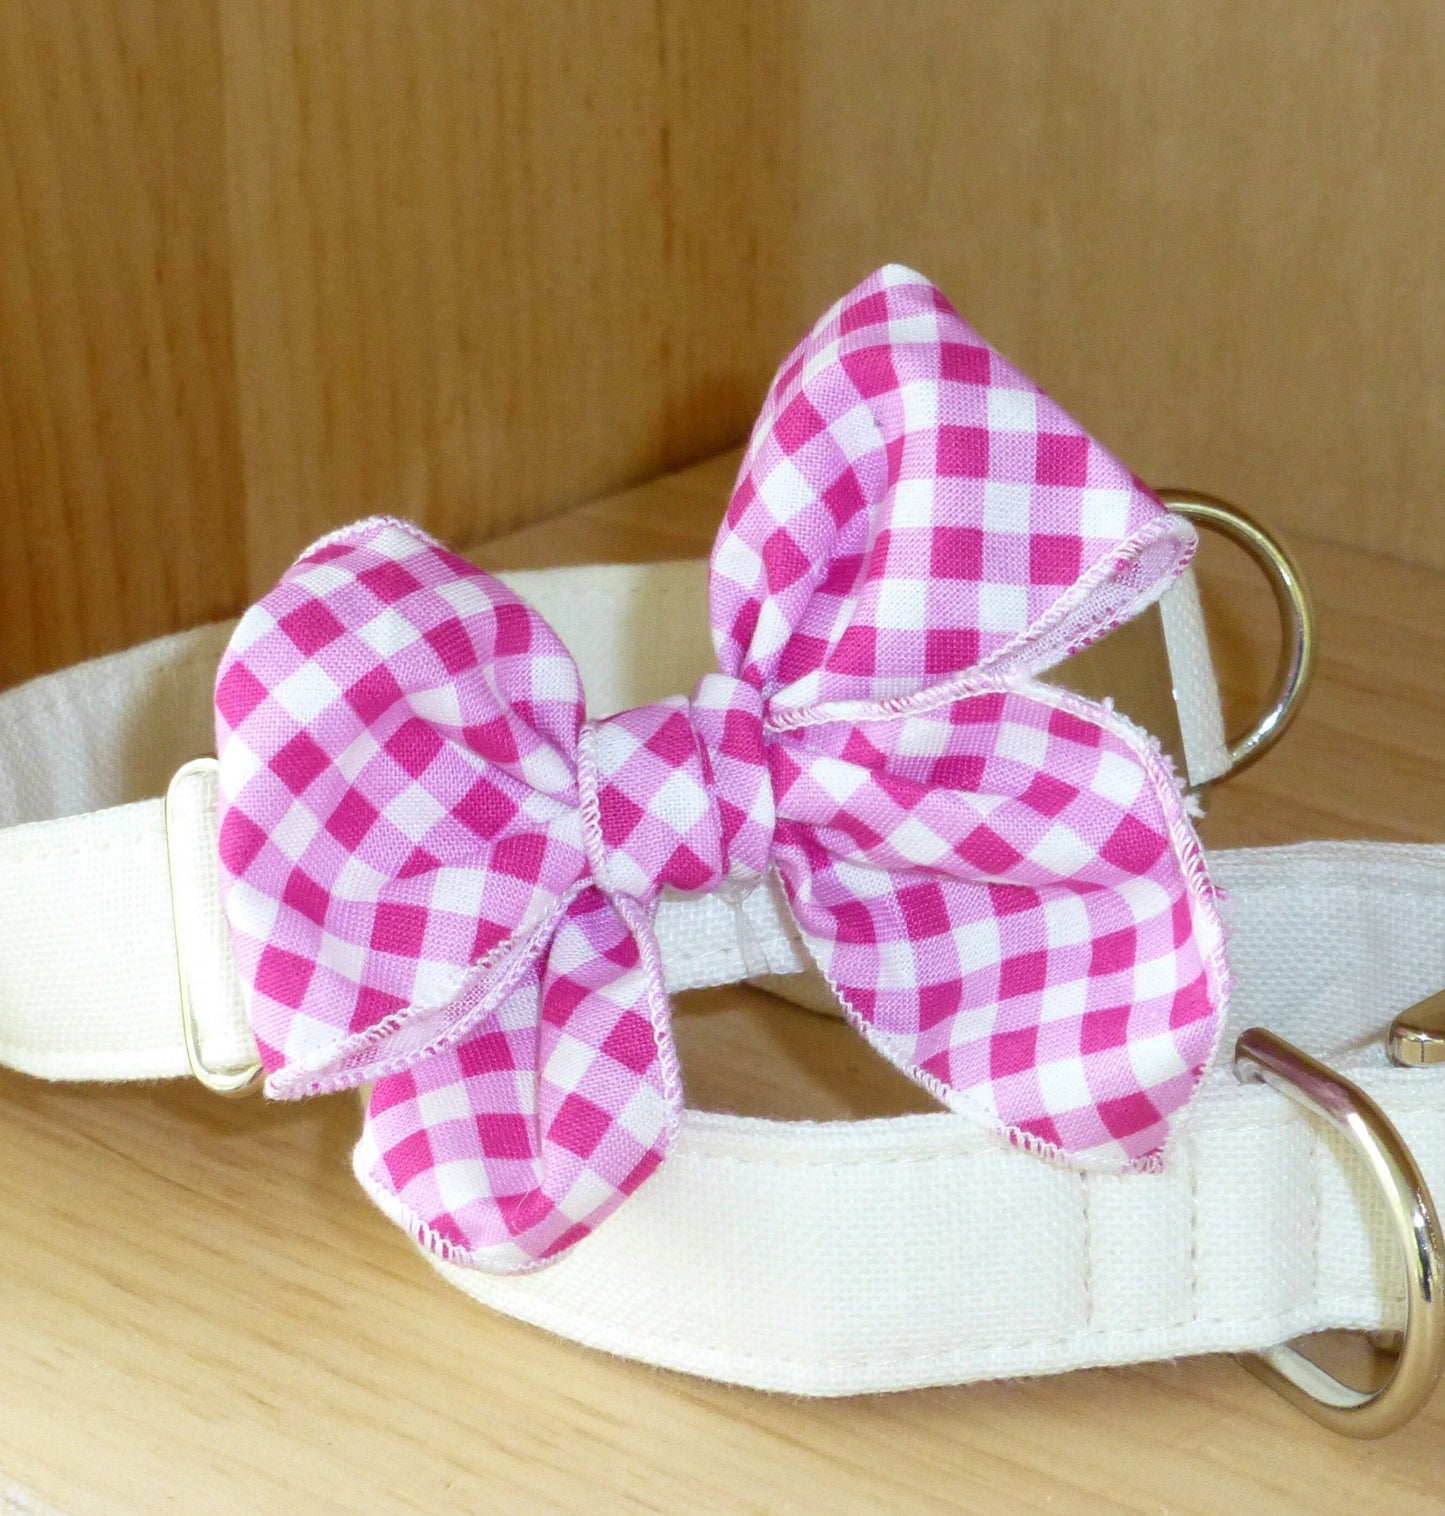 Bows for Dogs, Girl Dog Bow, Cute Dog Collar Bow, Dog Grooming Bows, Dog Hair Bows